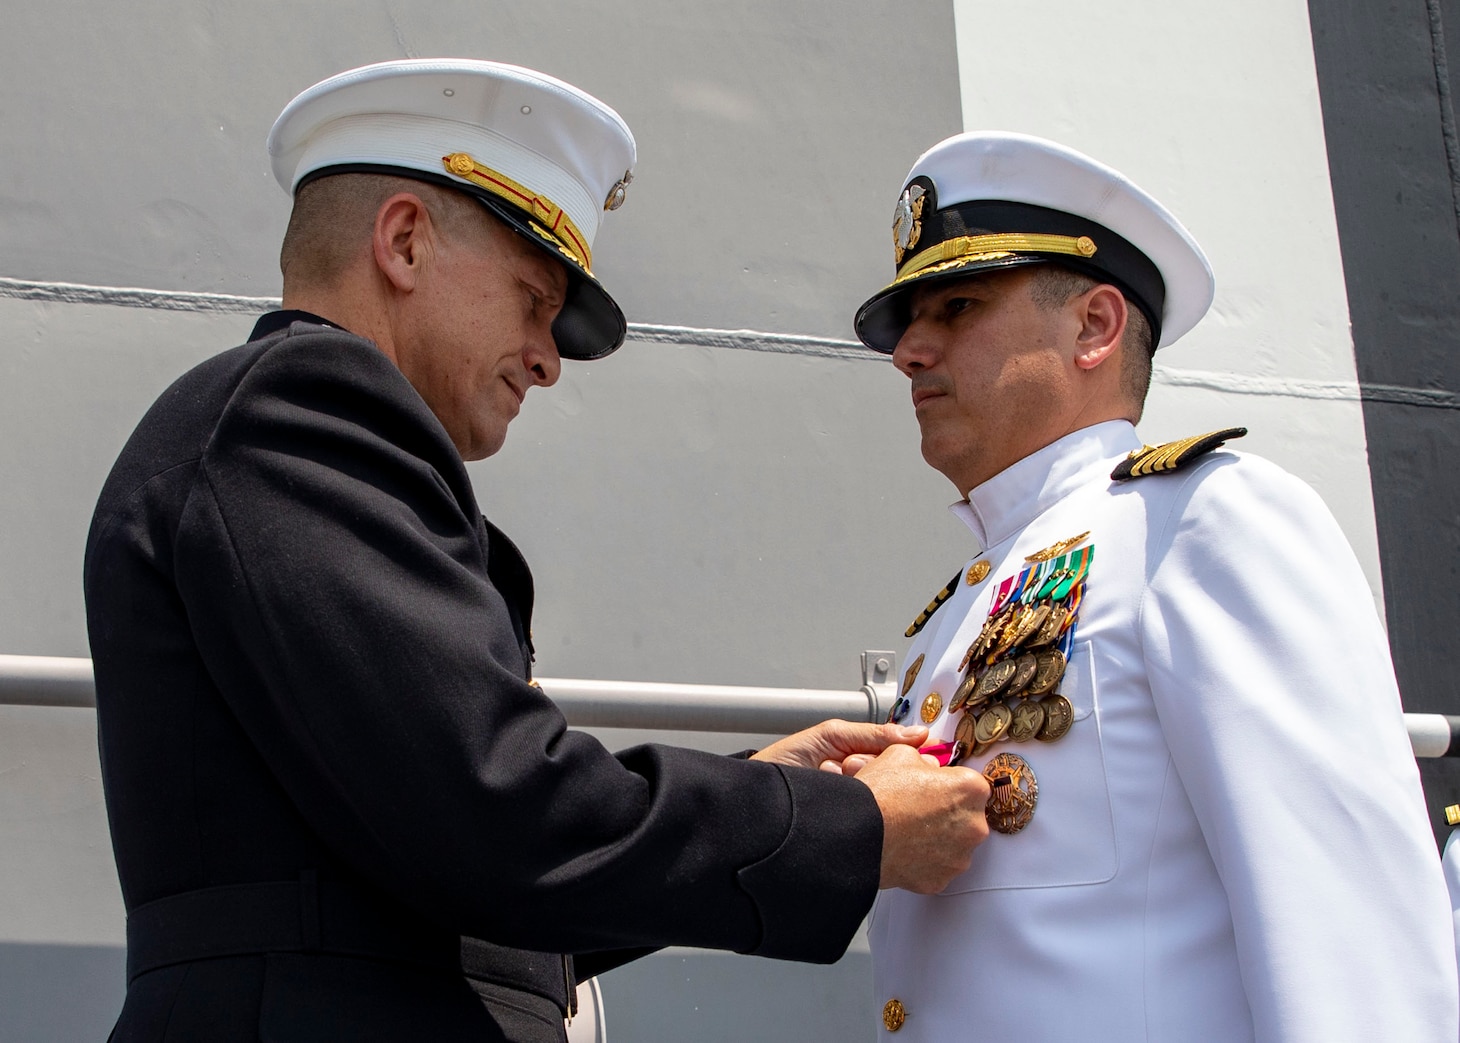 Brig. Gen. Fridrik Fridriksson, commanding general, 3d Marine Expeditionary Brigade, left, pins Capt. Tony Chavez, with an end of tour award during a change of command ceremony on the flight deck of amphibious assault ship USS Makin Island (LHD 8), April 28, 2023 in the the Philippines. The change of command ceremony is a time-honored naval tradition which formally proclaims the continuity and authority of command to the officers, men and women of the command. The Makin Island Amphibious Ready Group, comprised of Makin Island and amphibious transport dock USS Anchorage (LPD 23) and USS John P. Murtha (LPD 26), is operating in the U.S. 7th Fleet area of operations with the embarked 13th Marine Expeditionary Unit to enhance interoperability with Allies and partners and serve as a ready-response force to defend peace and maintain stability in the Indo-Pacific region.